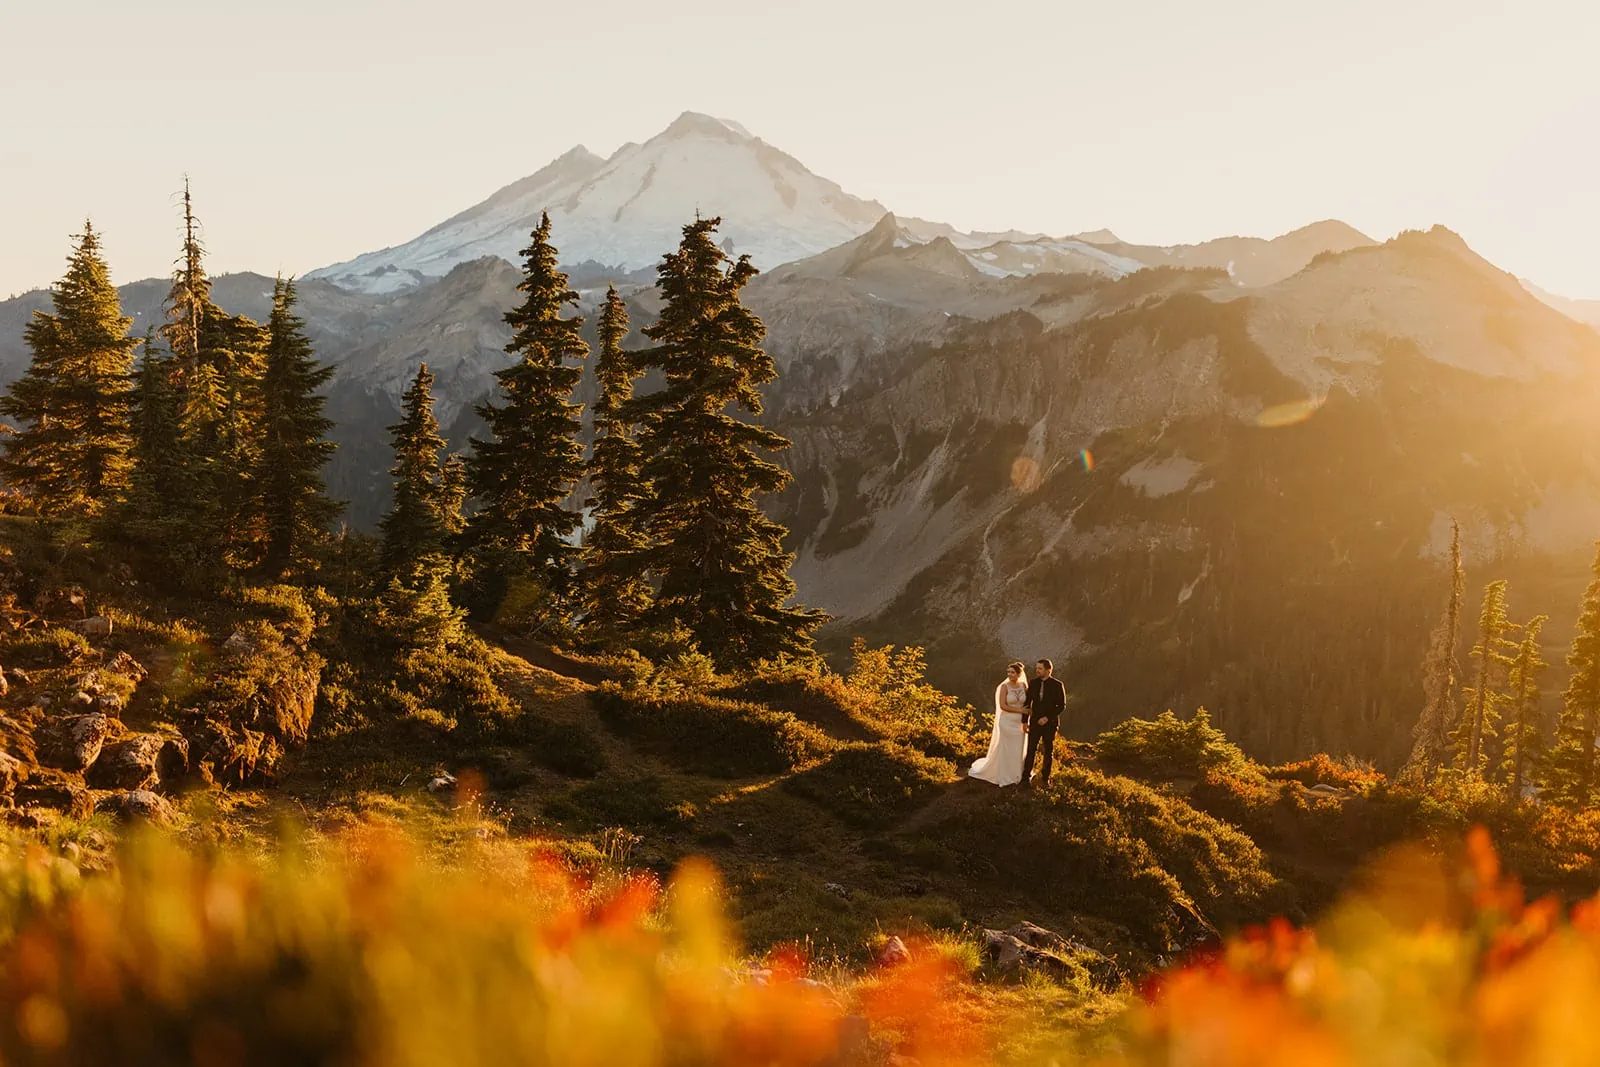 A couple stands in the distance with a fall sunset mountain landscape.